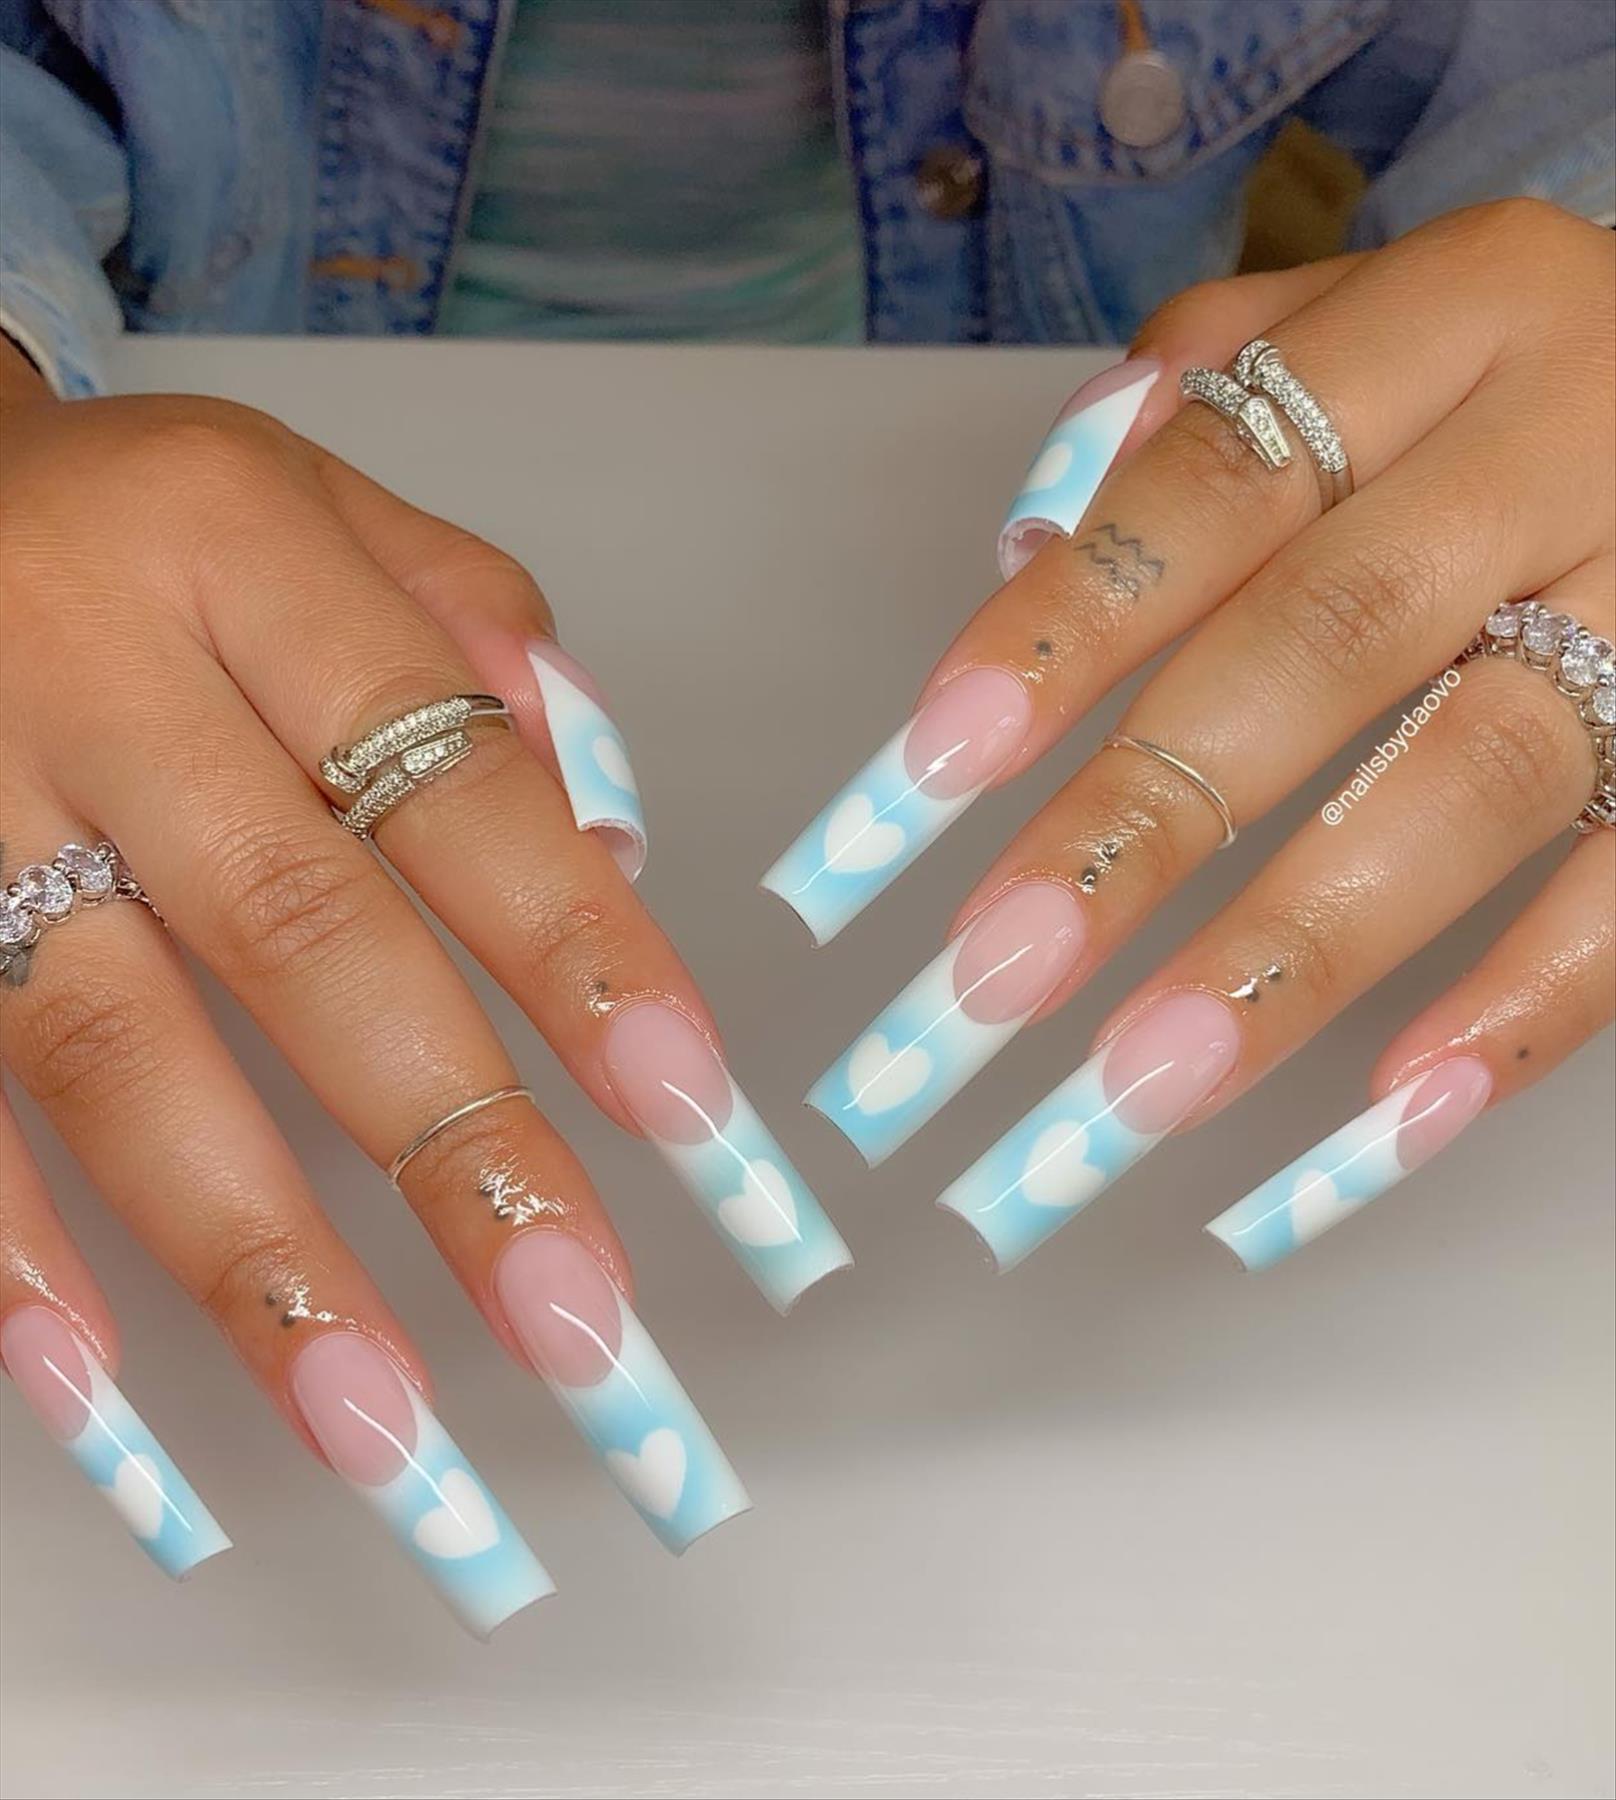 Luxury French tip coffin nails you'll flip for